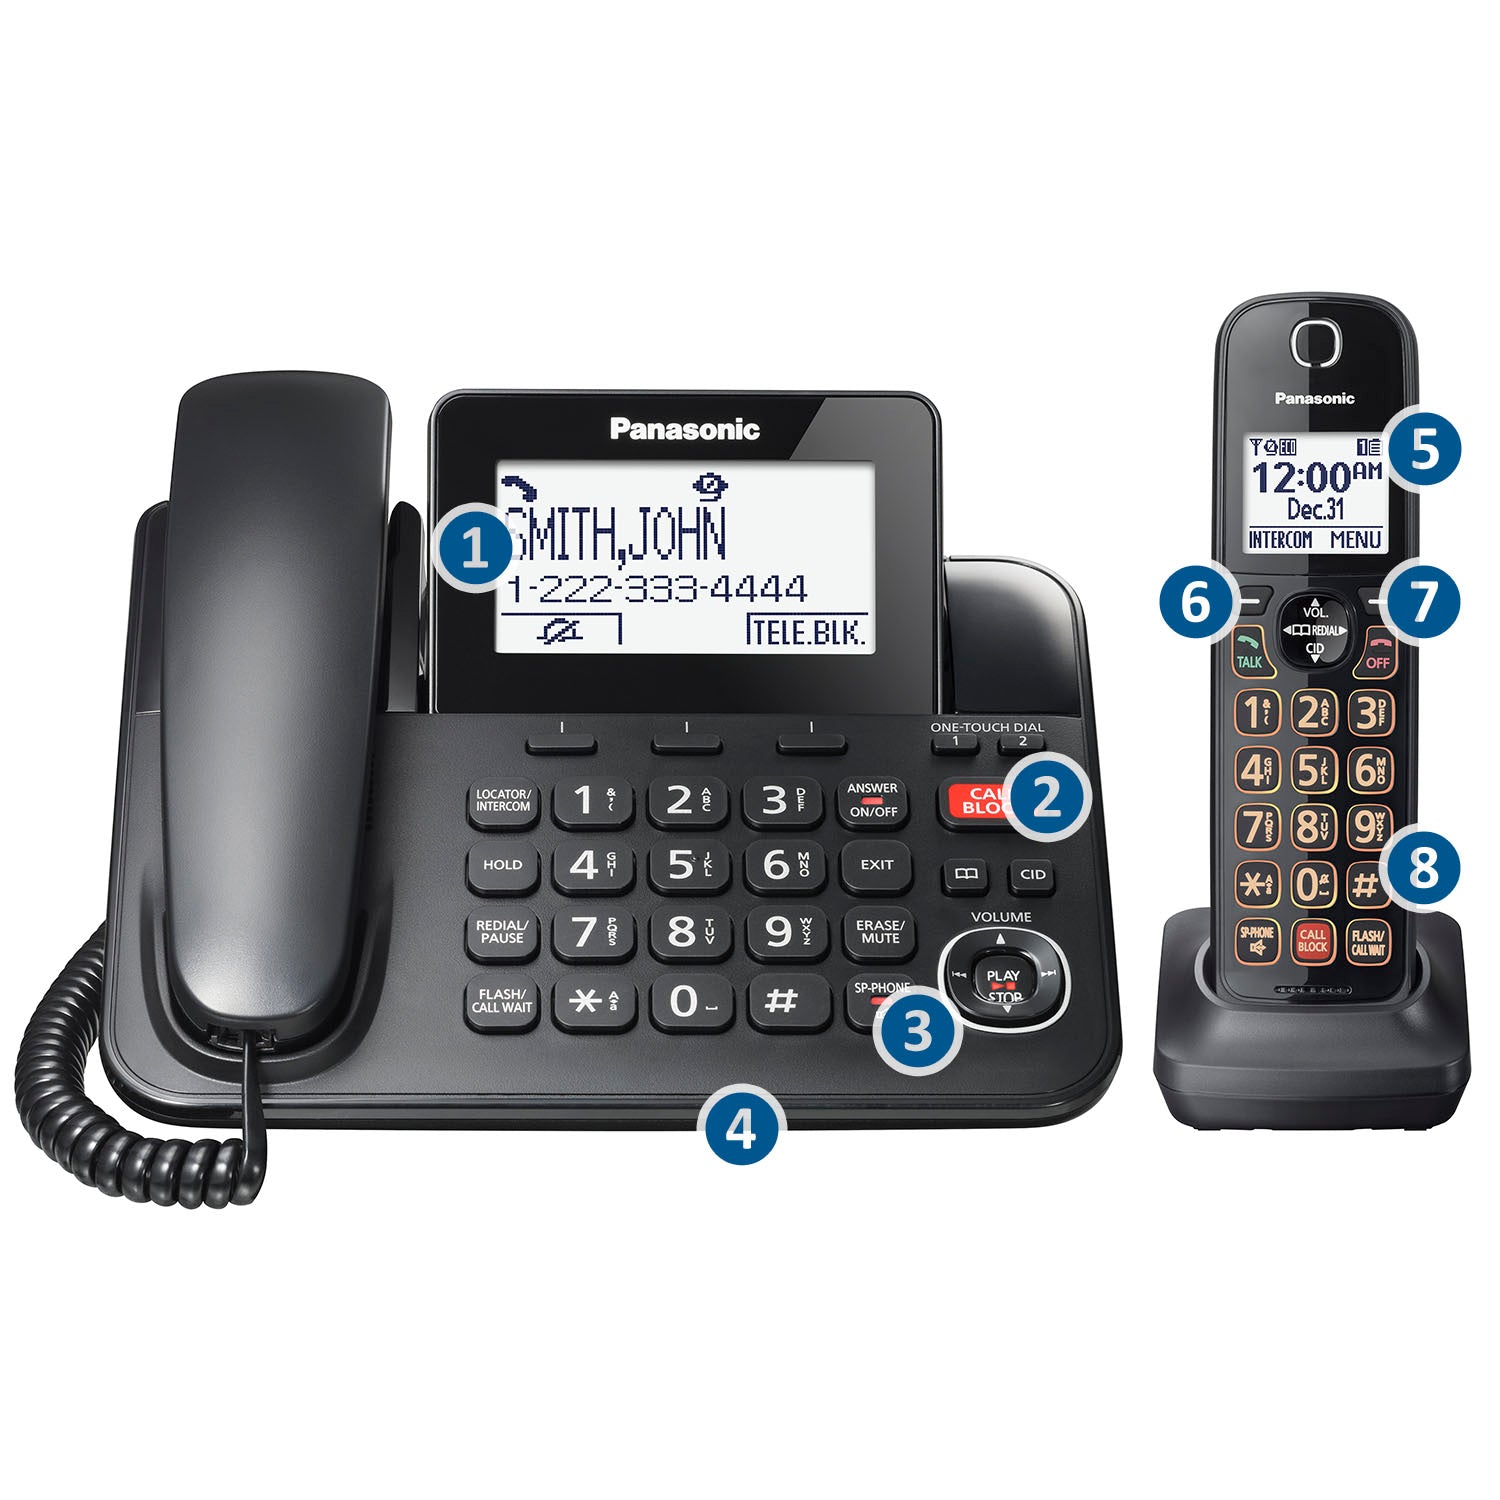 Panasonic Cordless Phone Extension Handset Accessory to Connect to 